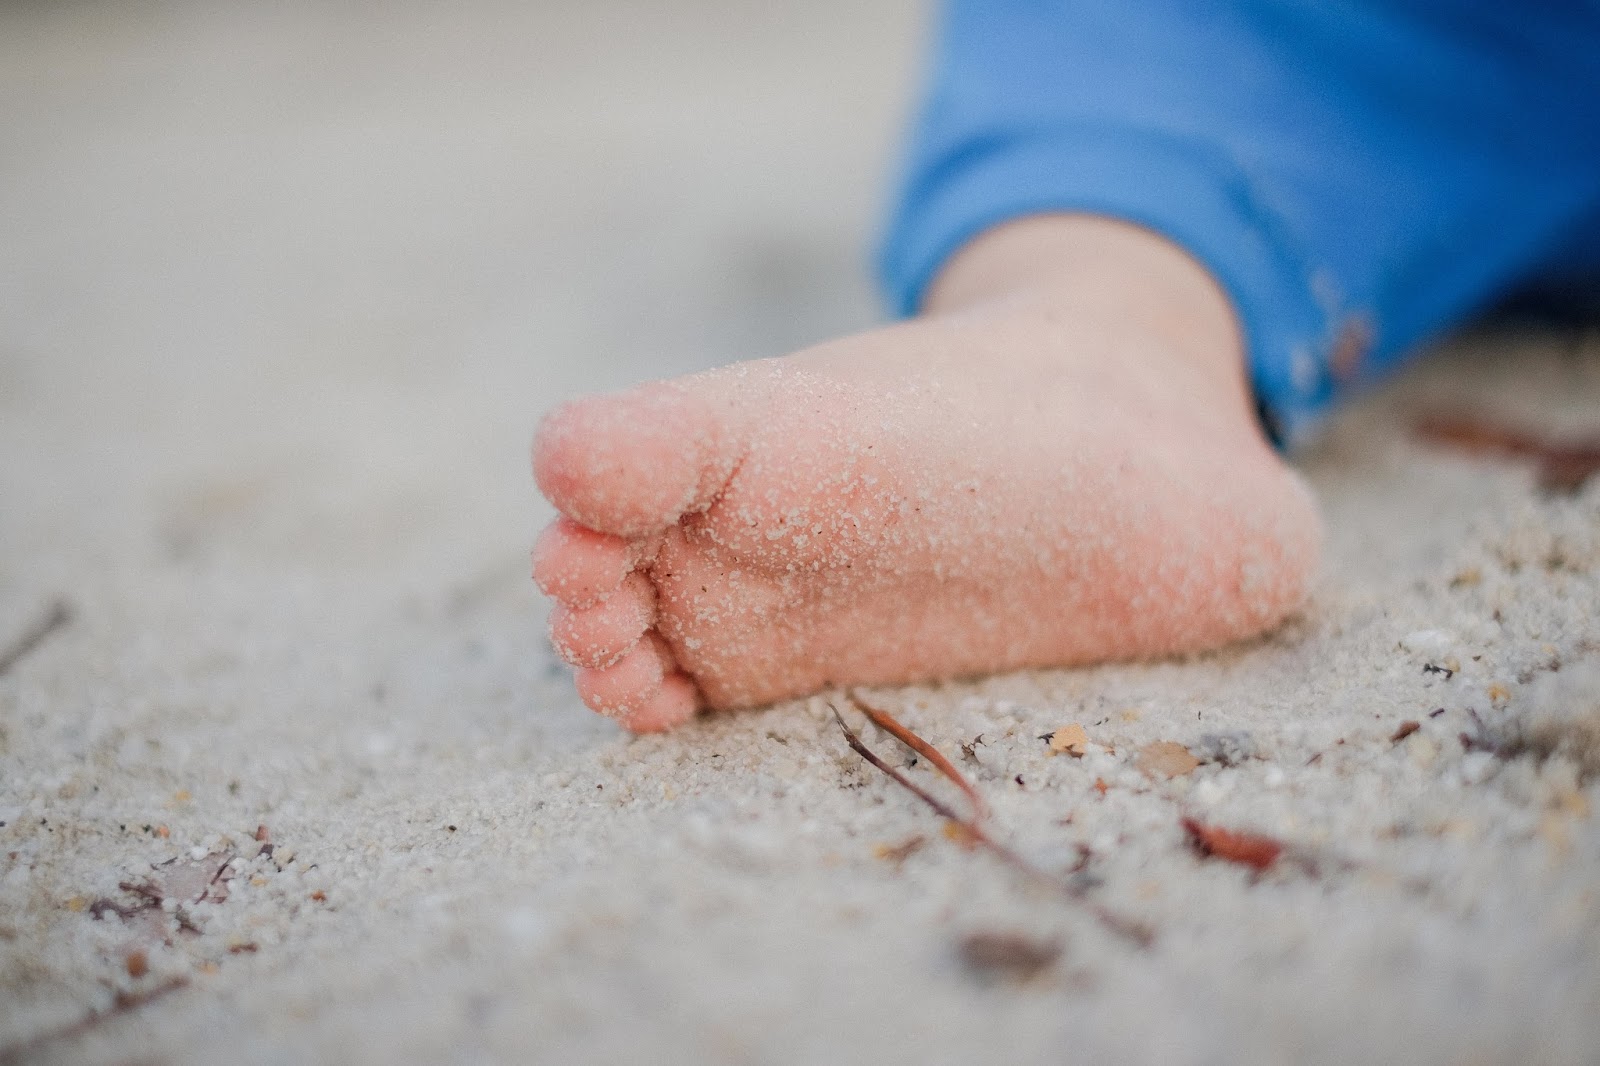 Foot of a baby playing on a beach